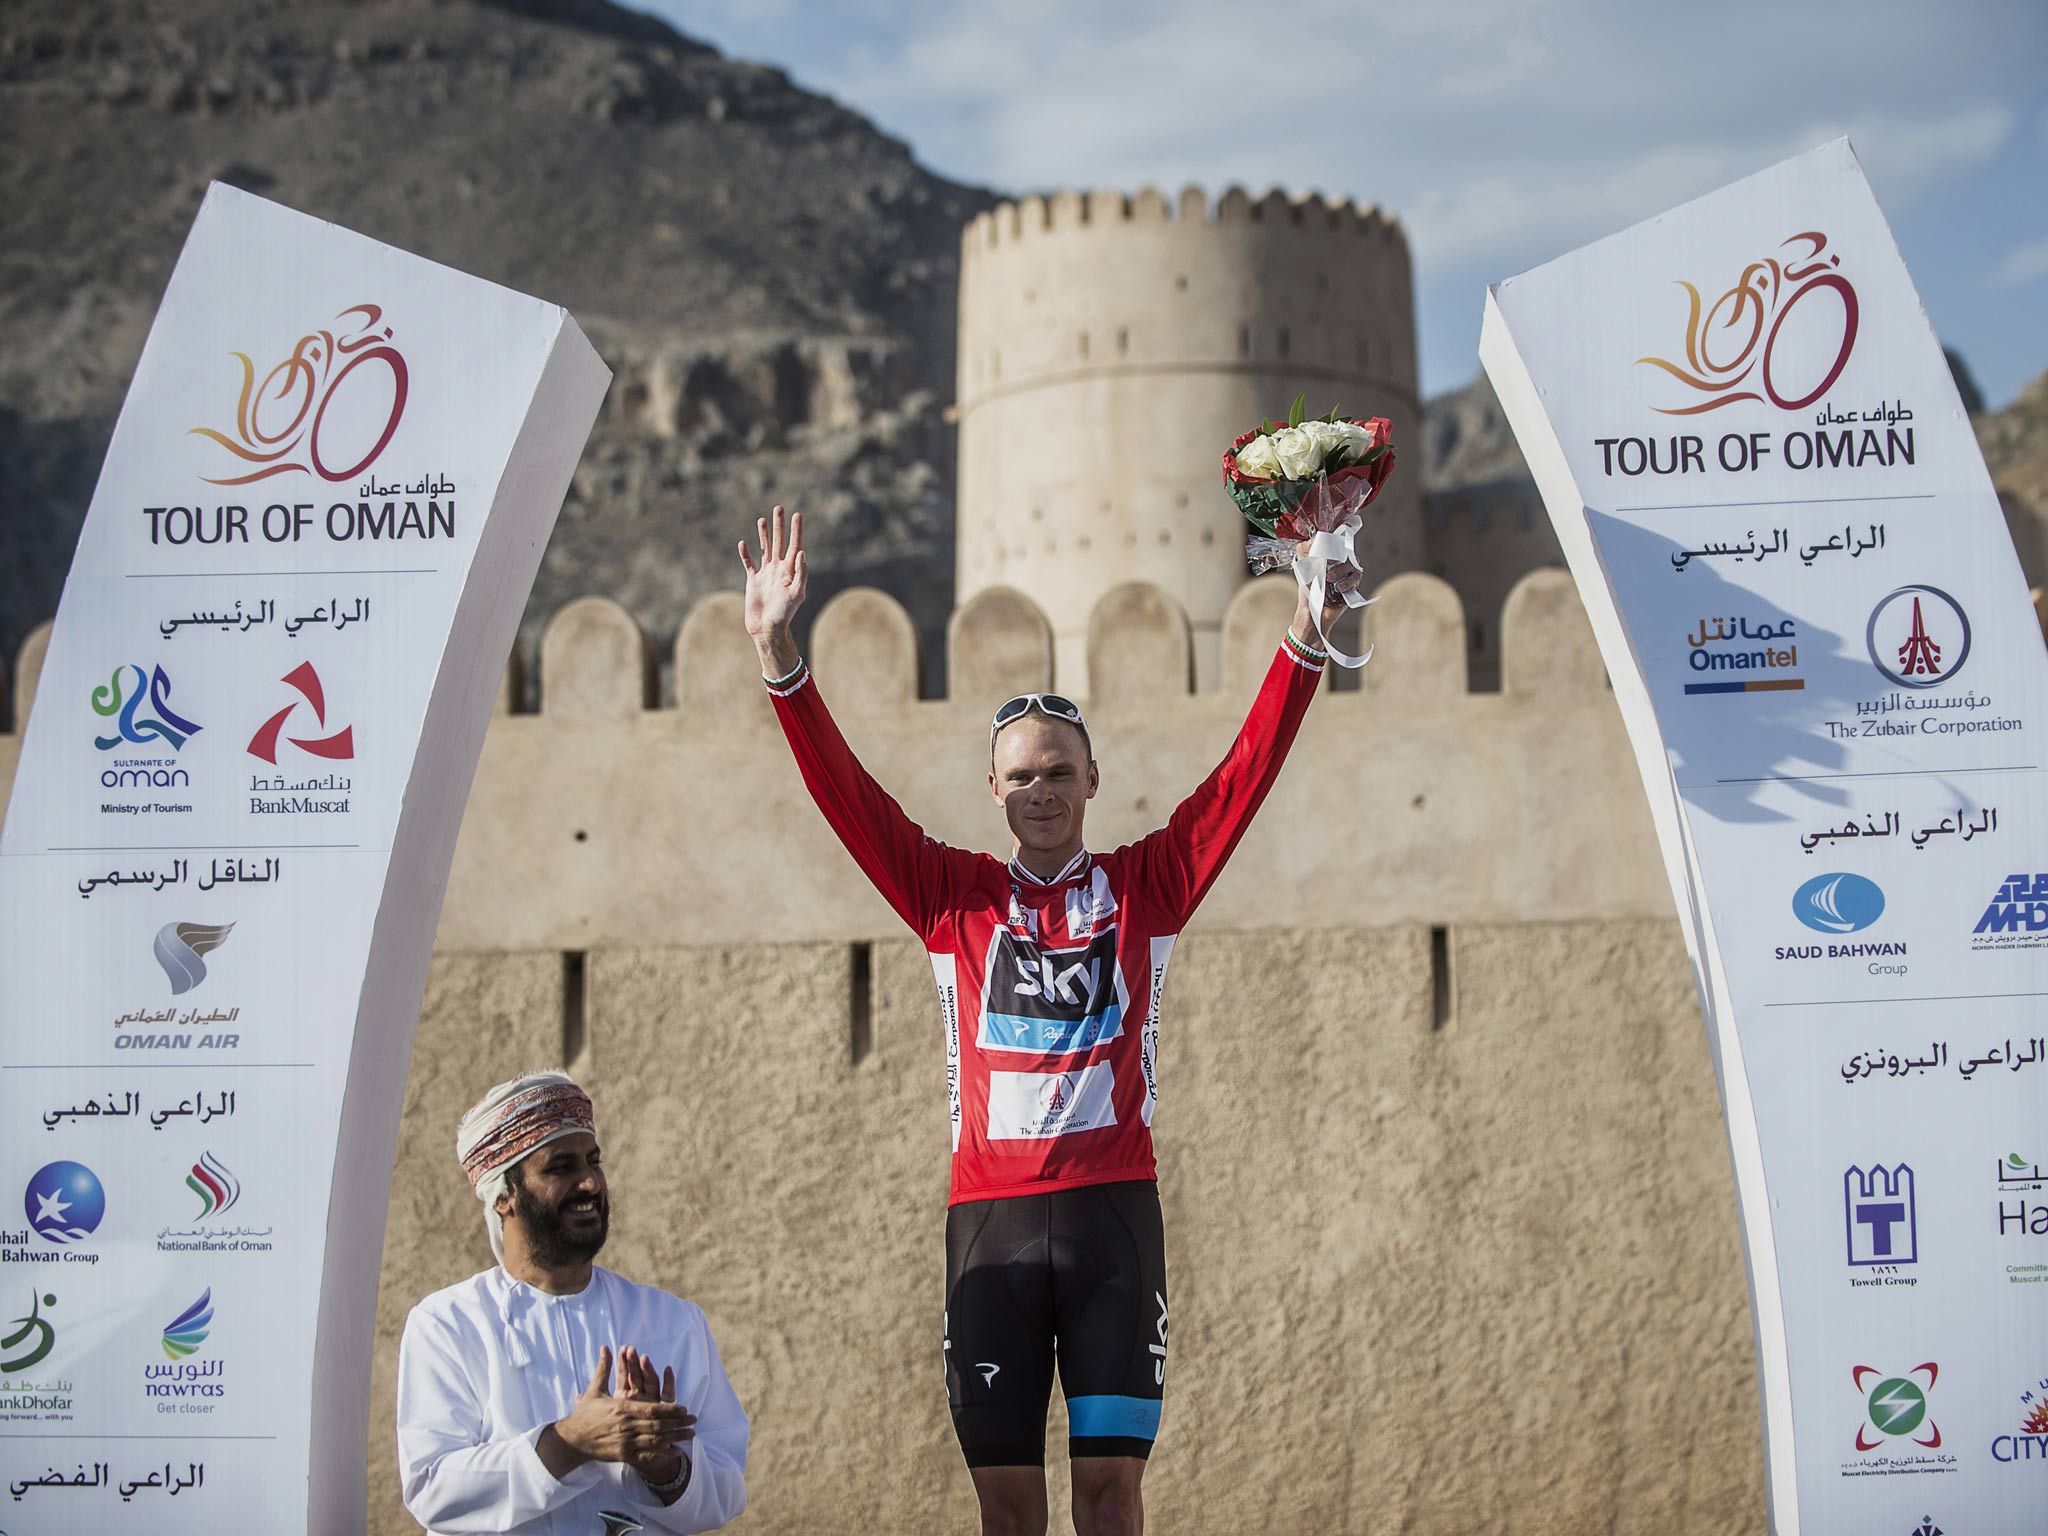 Chris Froome with the Tour of Oman leader's red jersey